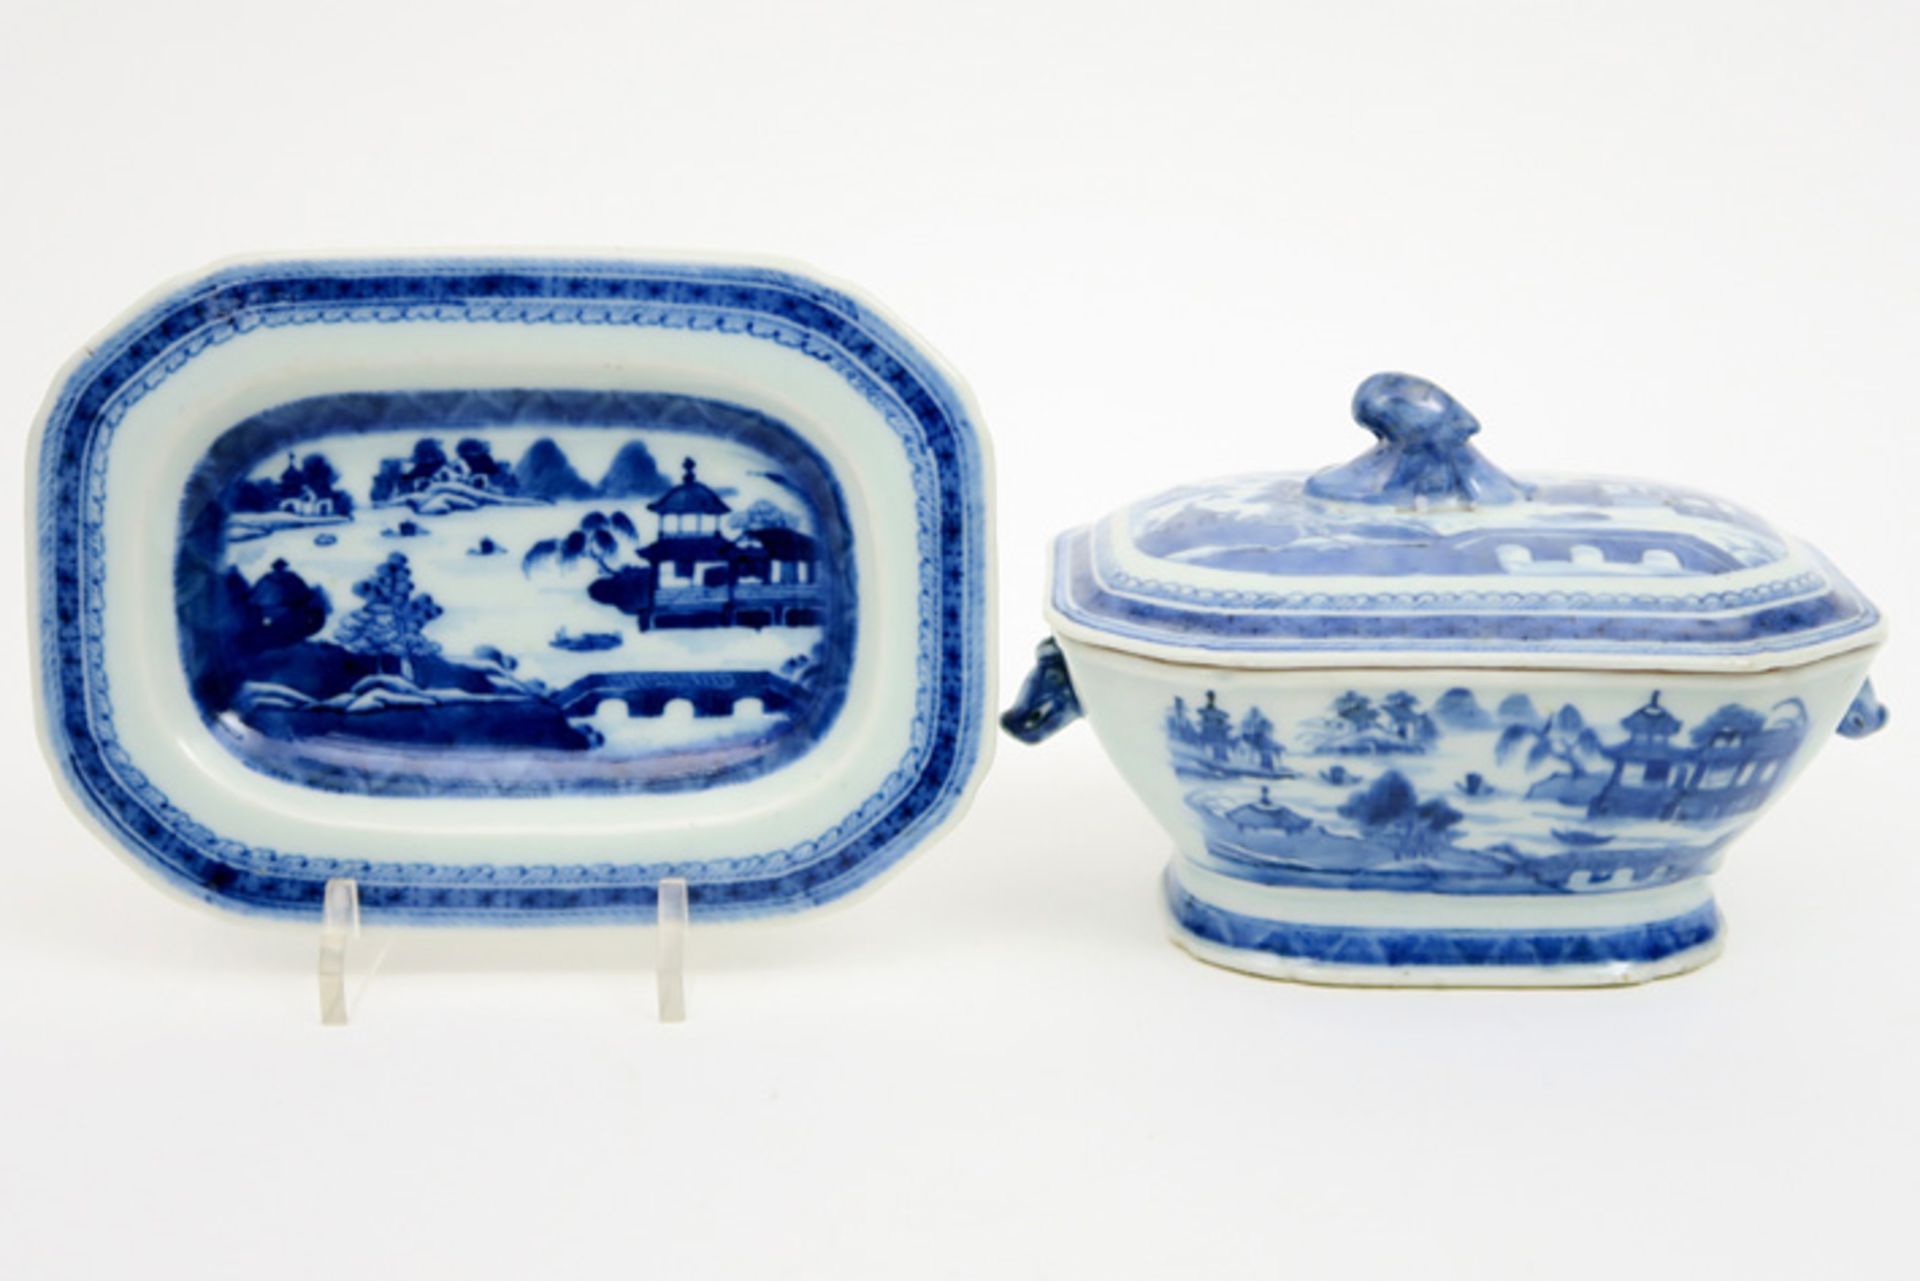 small 18th Cent. Chinese tureen with its lid and dish in porcelain with a blue-white landscape decor - Image 3 of 3